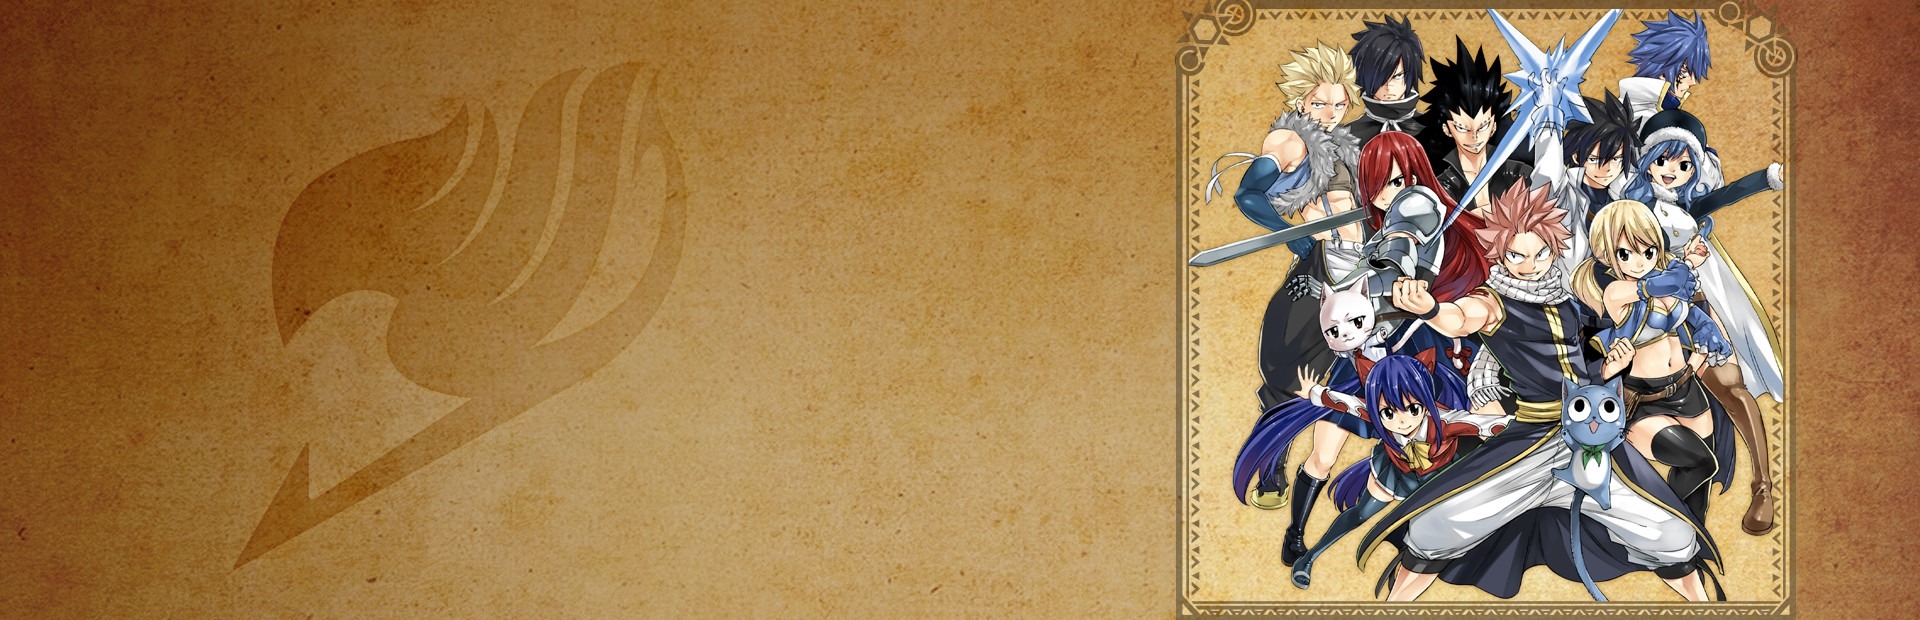 Banner Fairy Tail Digital Deluxe